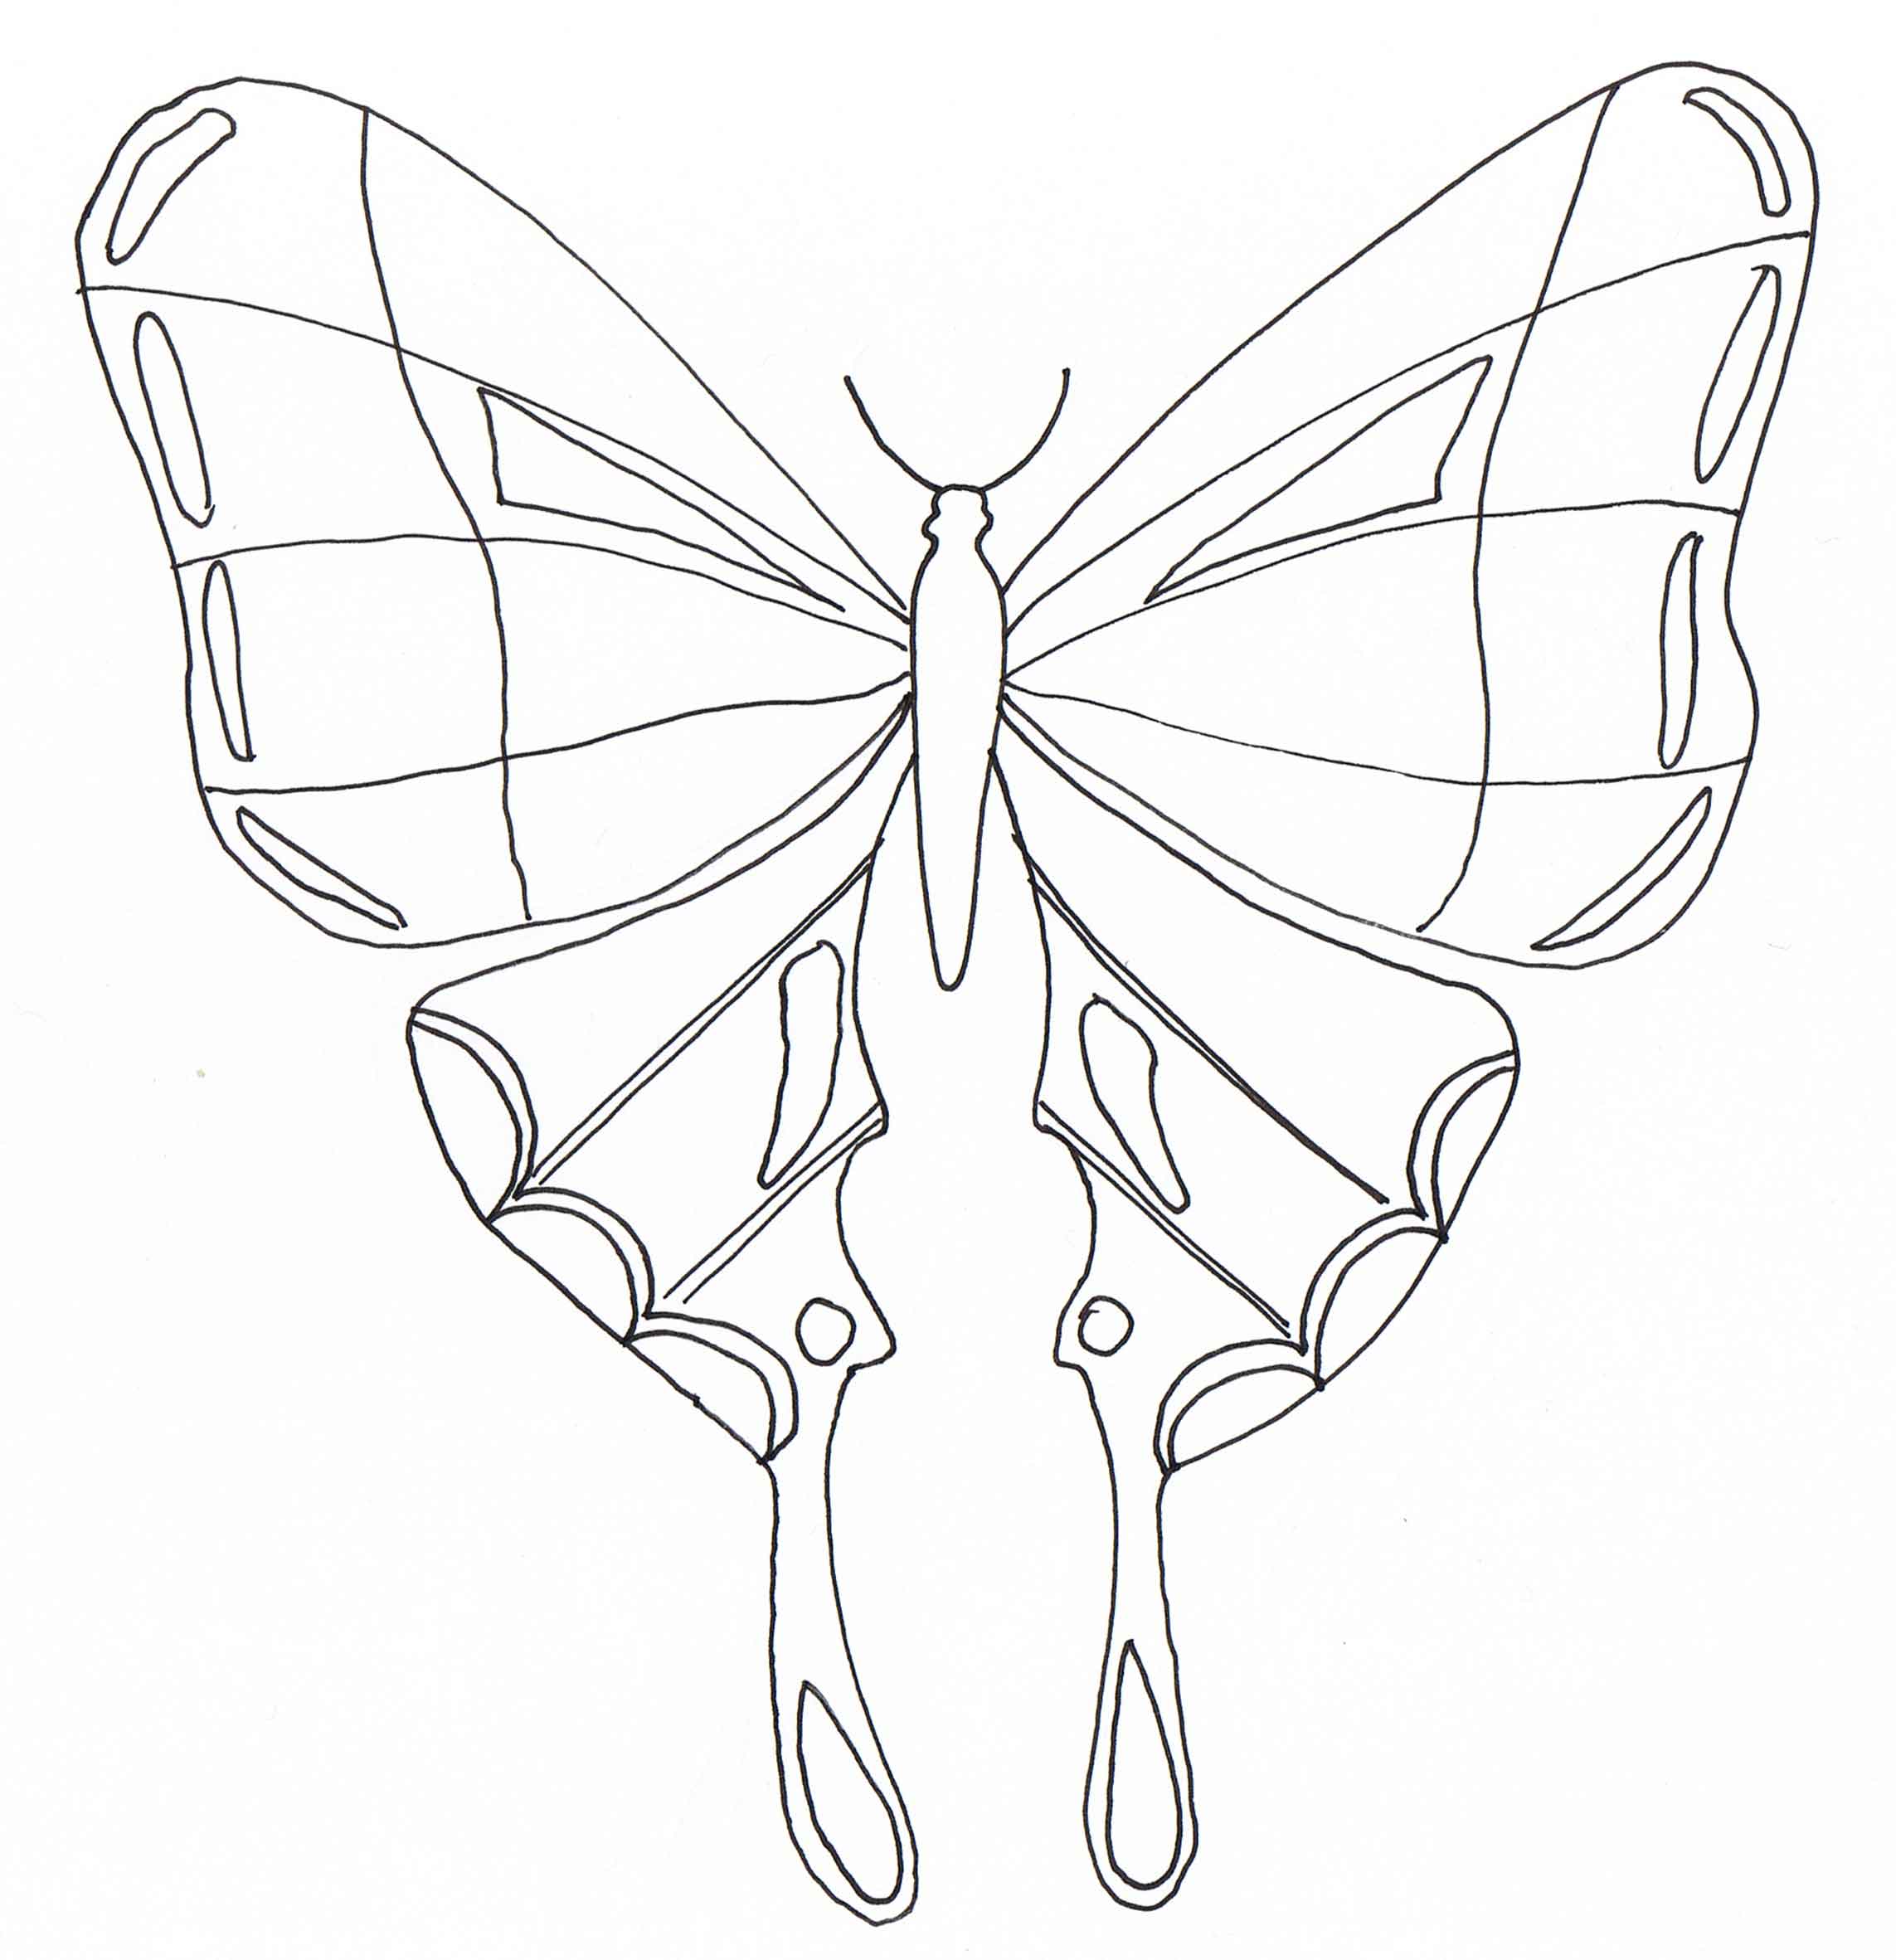 Simple butterfly - Insects Coloring pages for kids to ...